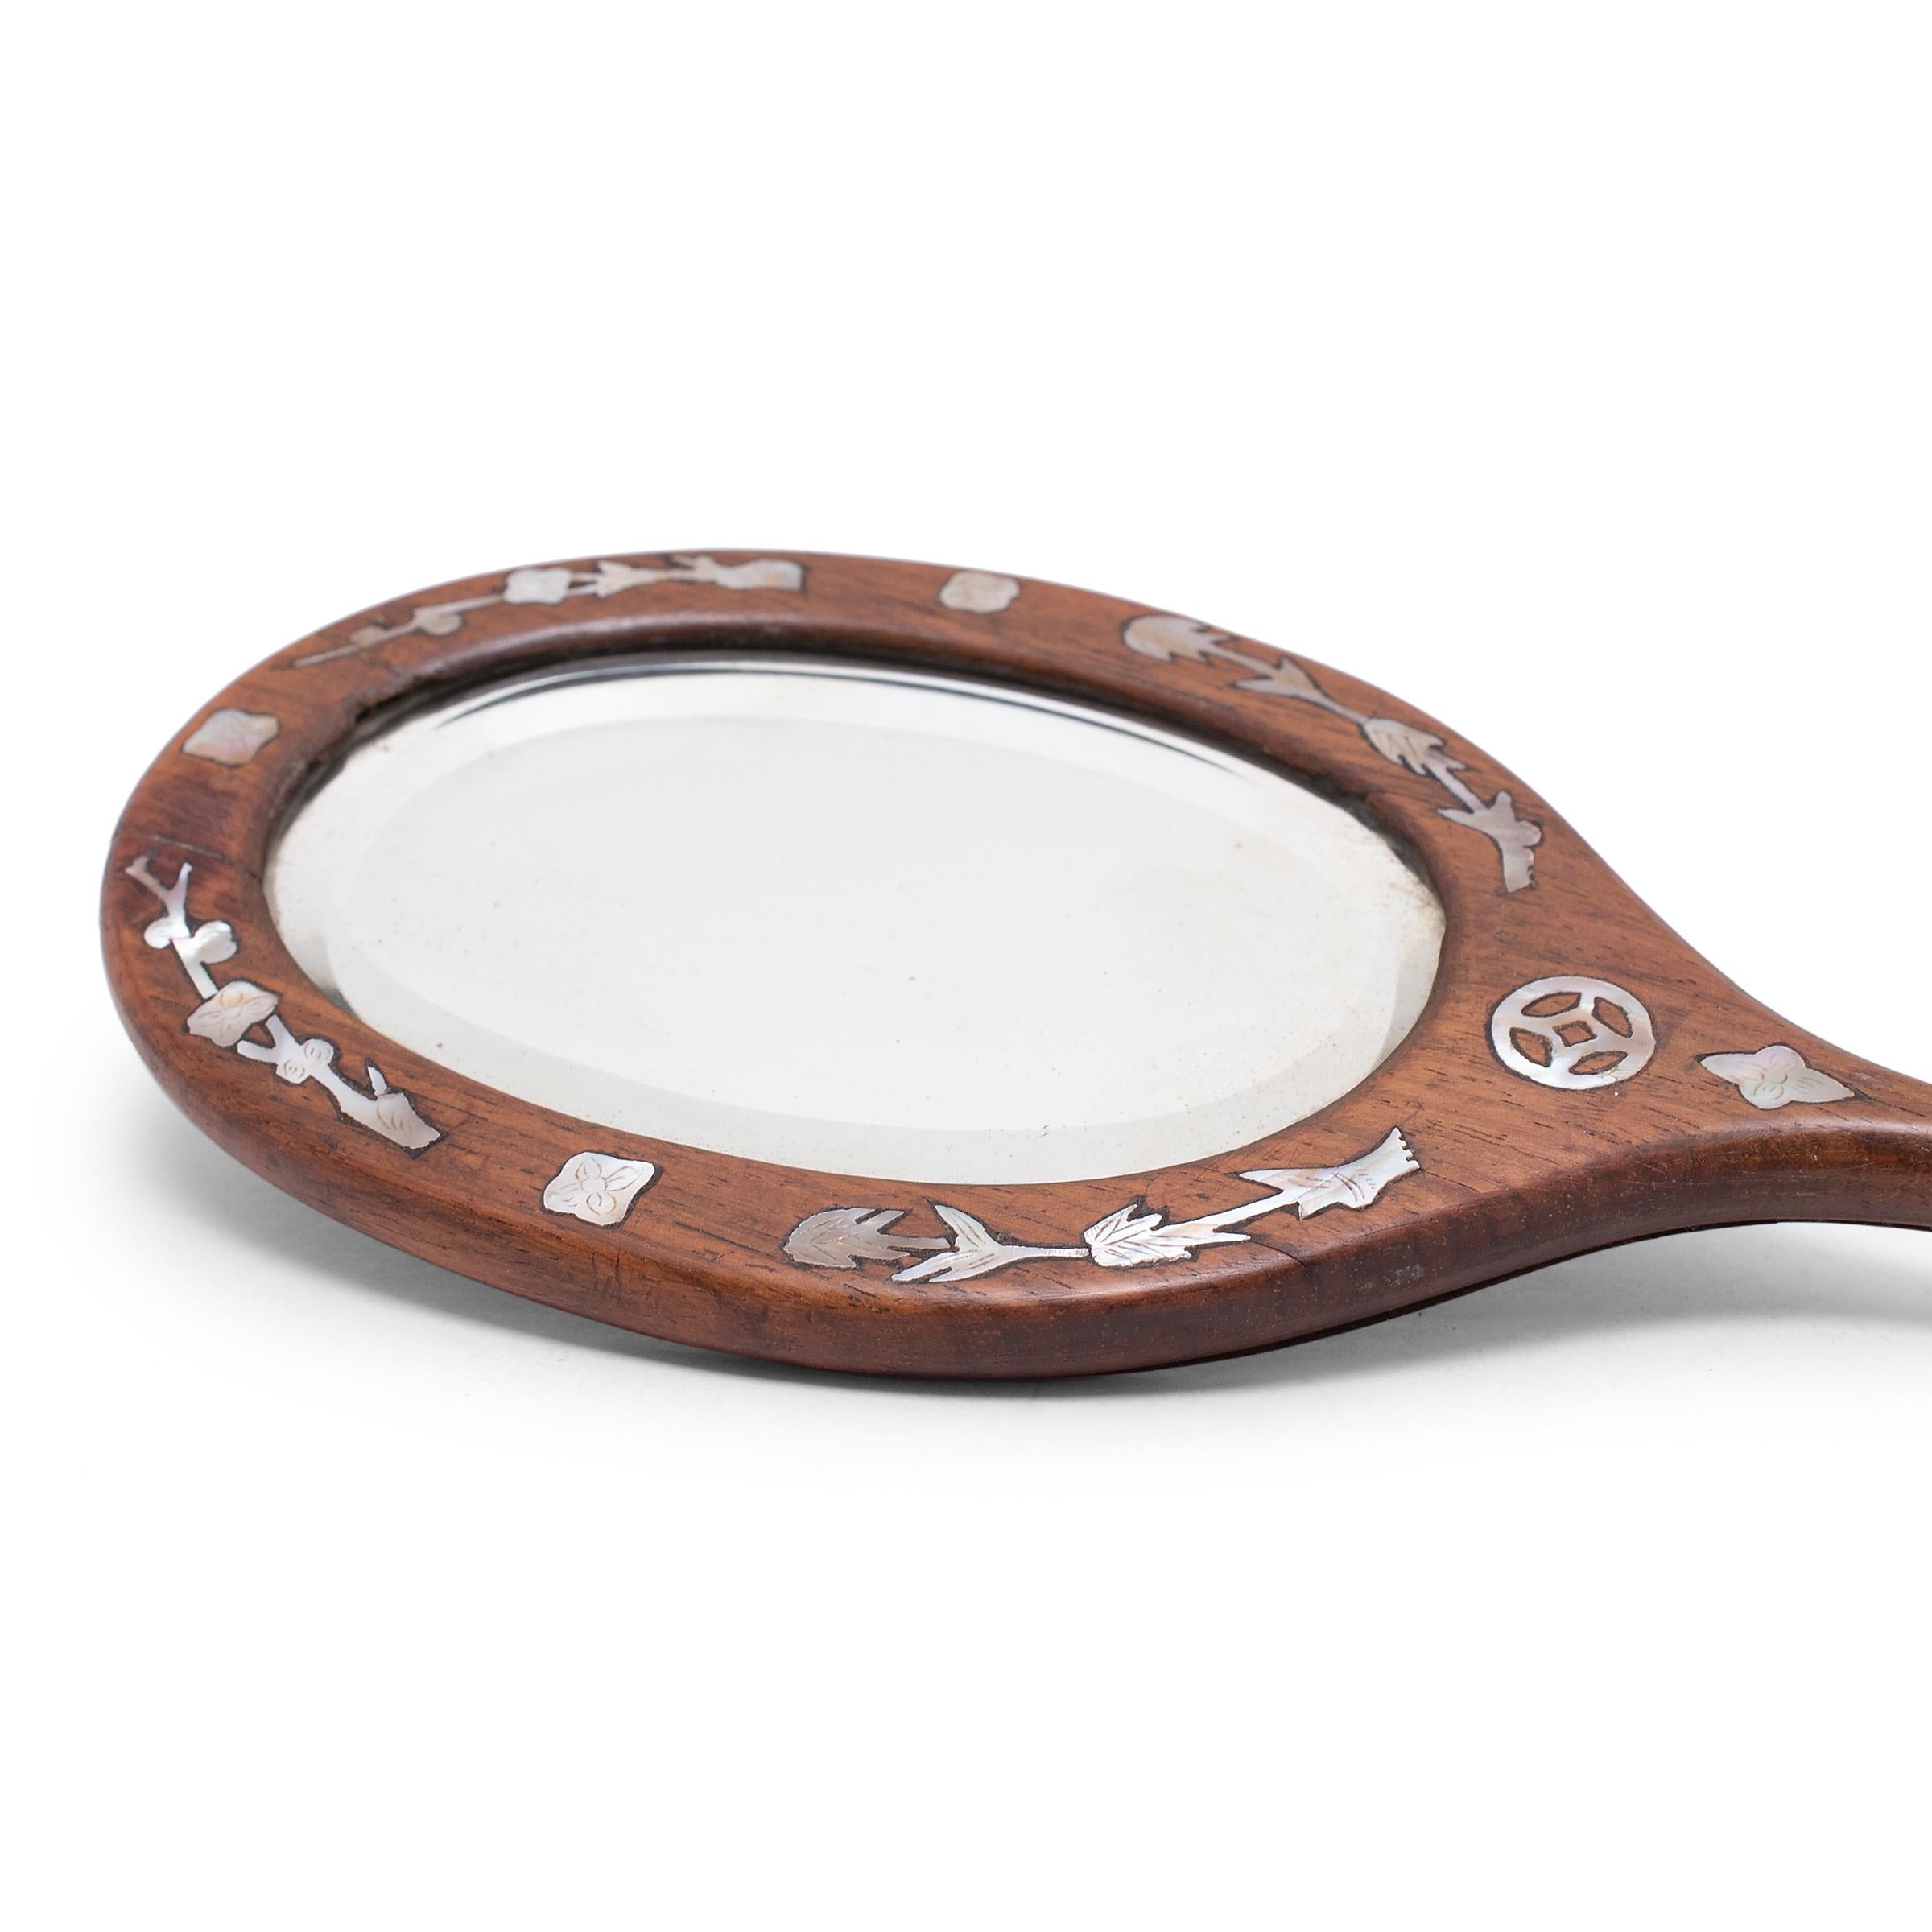 This early 20th-century oval hand mirror is set in a fine hardwood frame decorated with mother-of-pearl inlay of bamboo culms and plum blossom branches. The handle is decorated with a coin for wealth and a Shou symbol for longevity. Each piece of